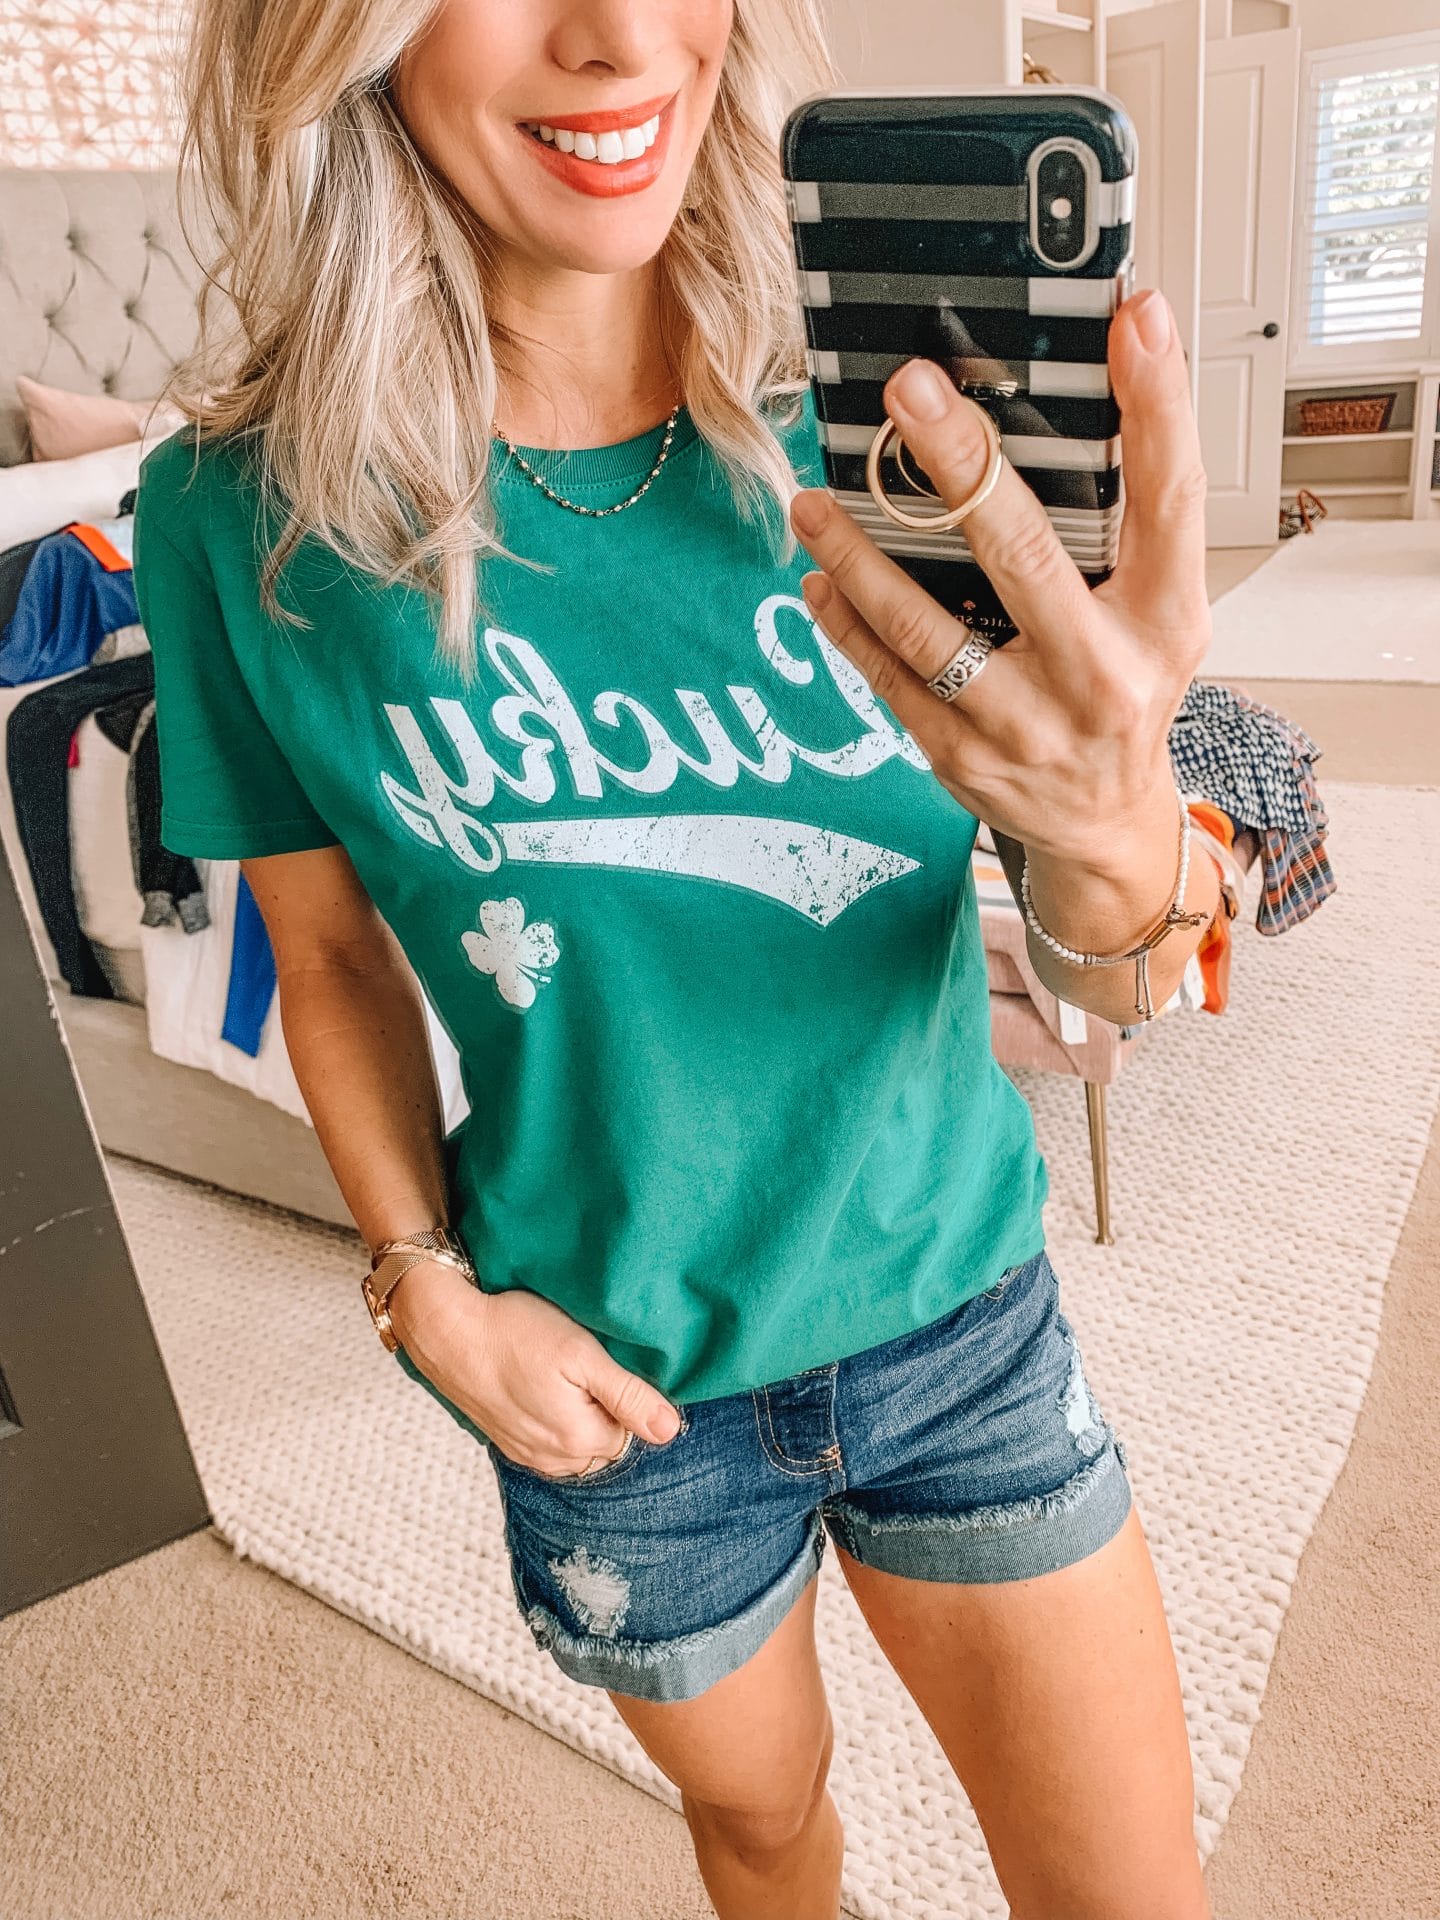 Lucky T-shirt and jean shorts